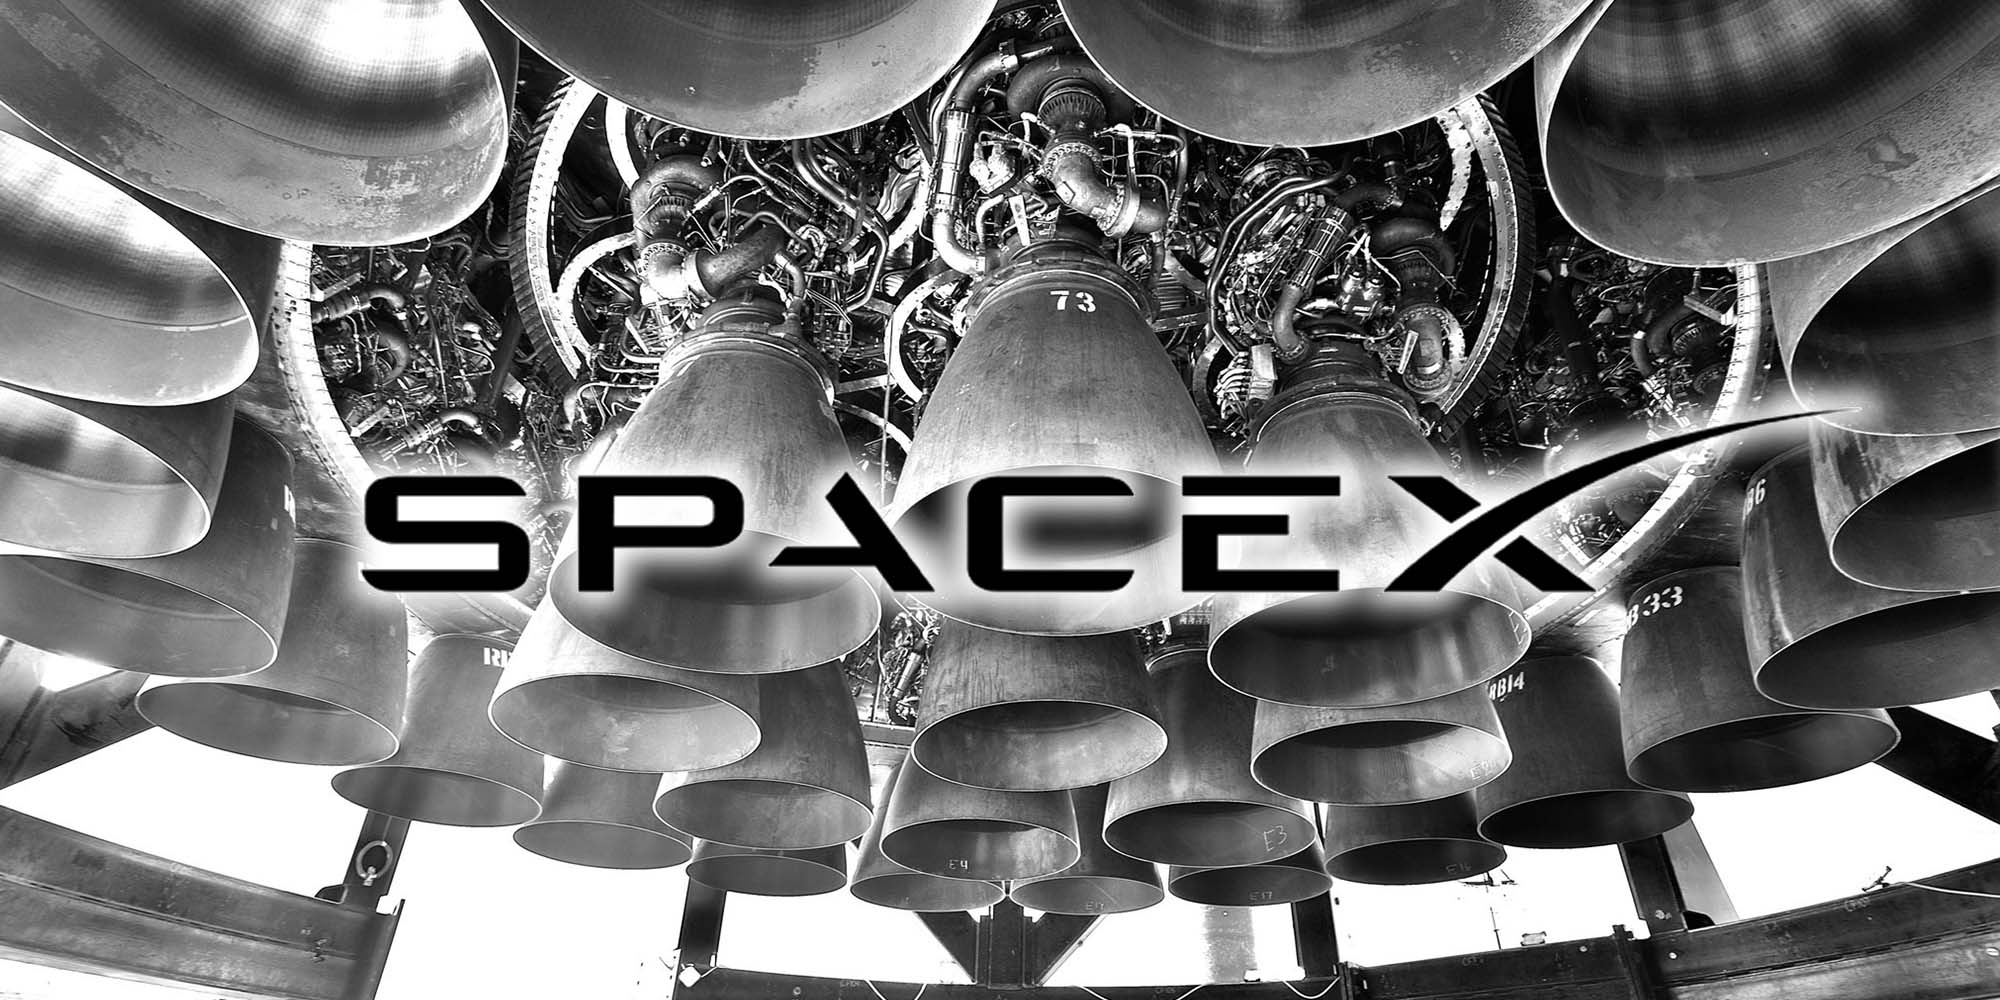 Elon Musk says SpaceX could face ‘genuine risk of bankruptcy’ from Starship engine production